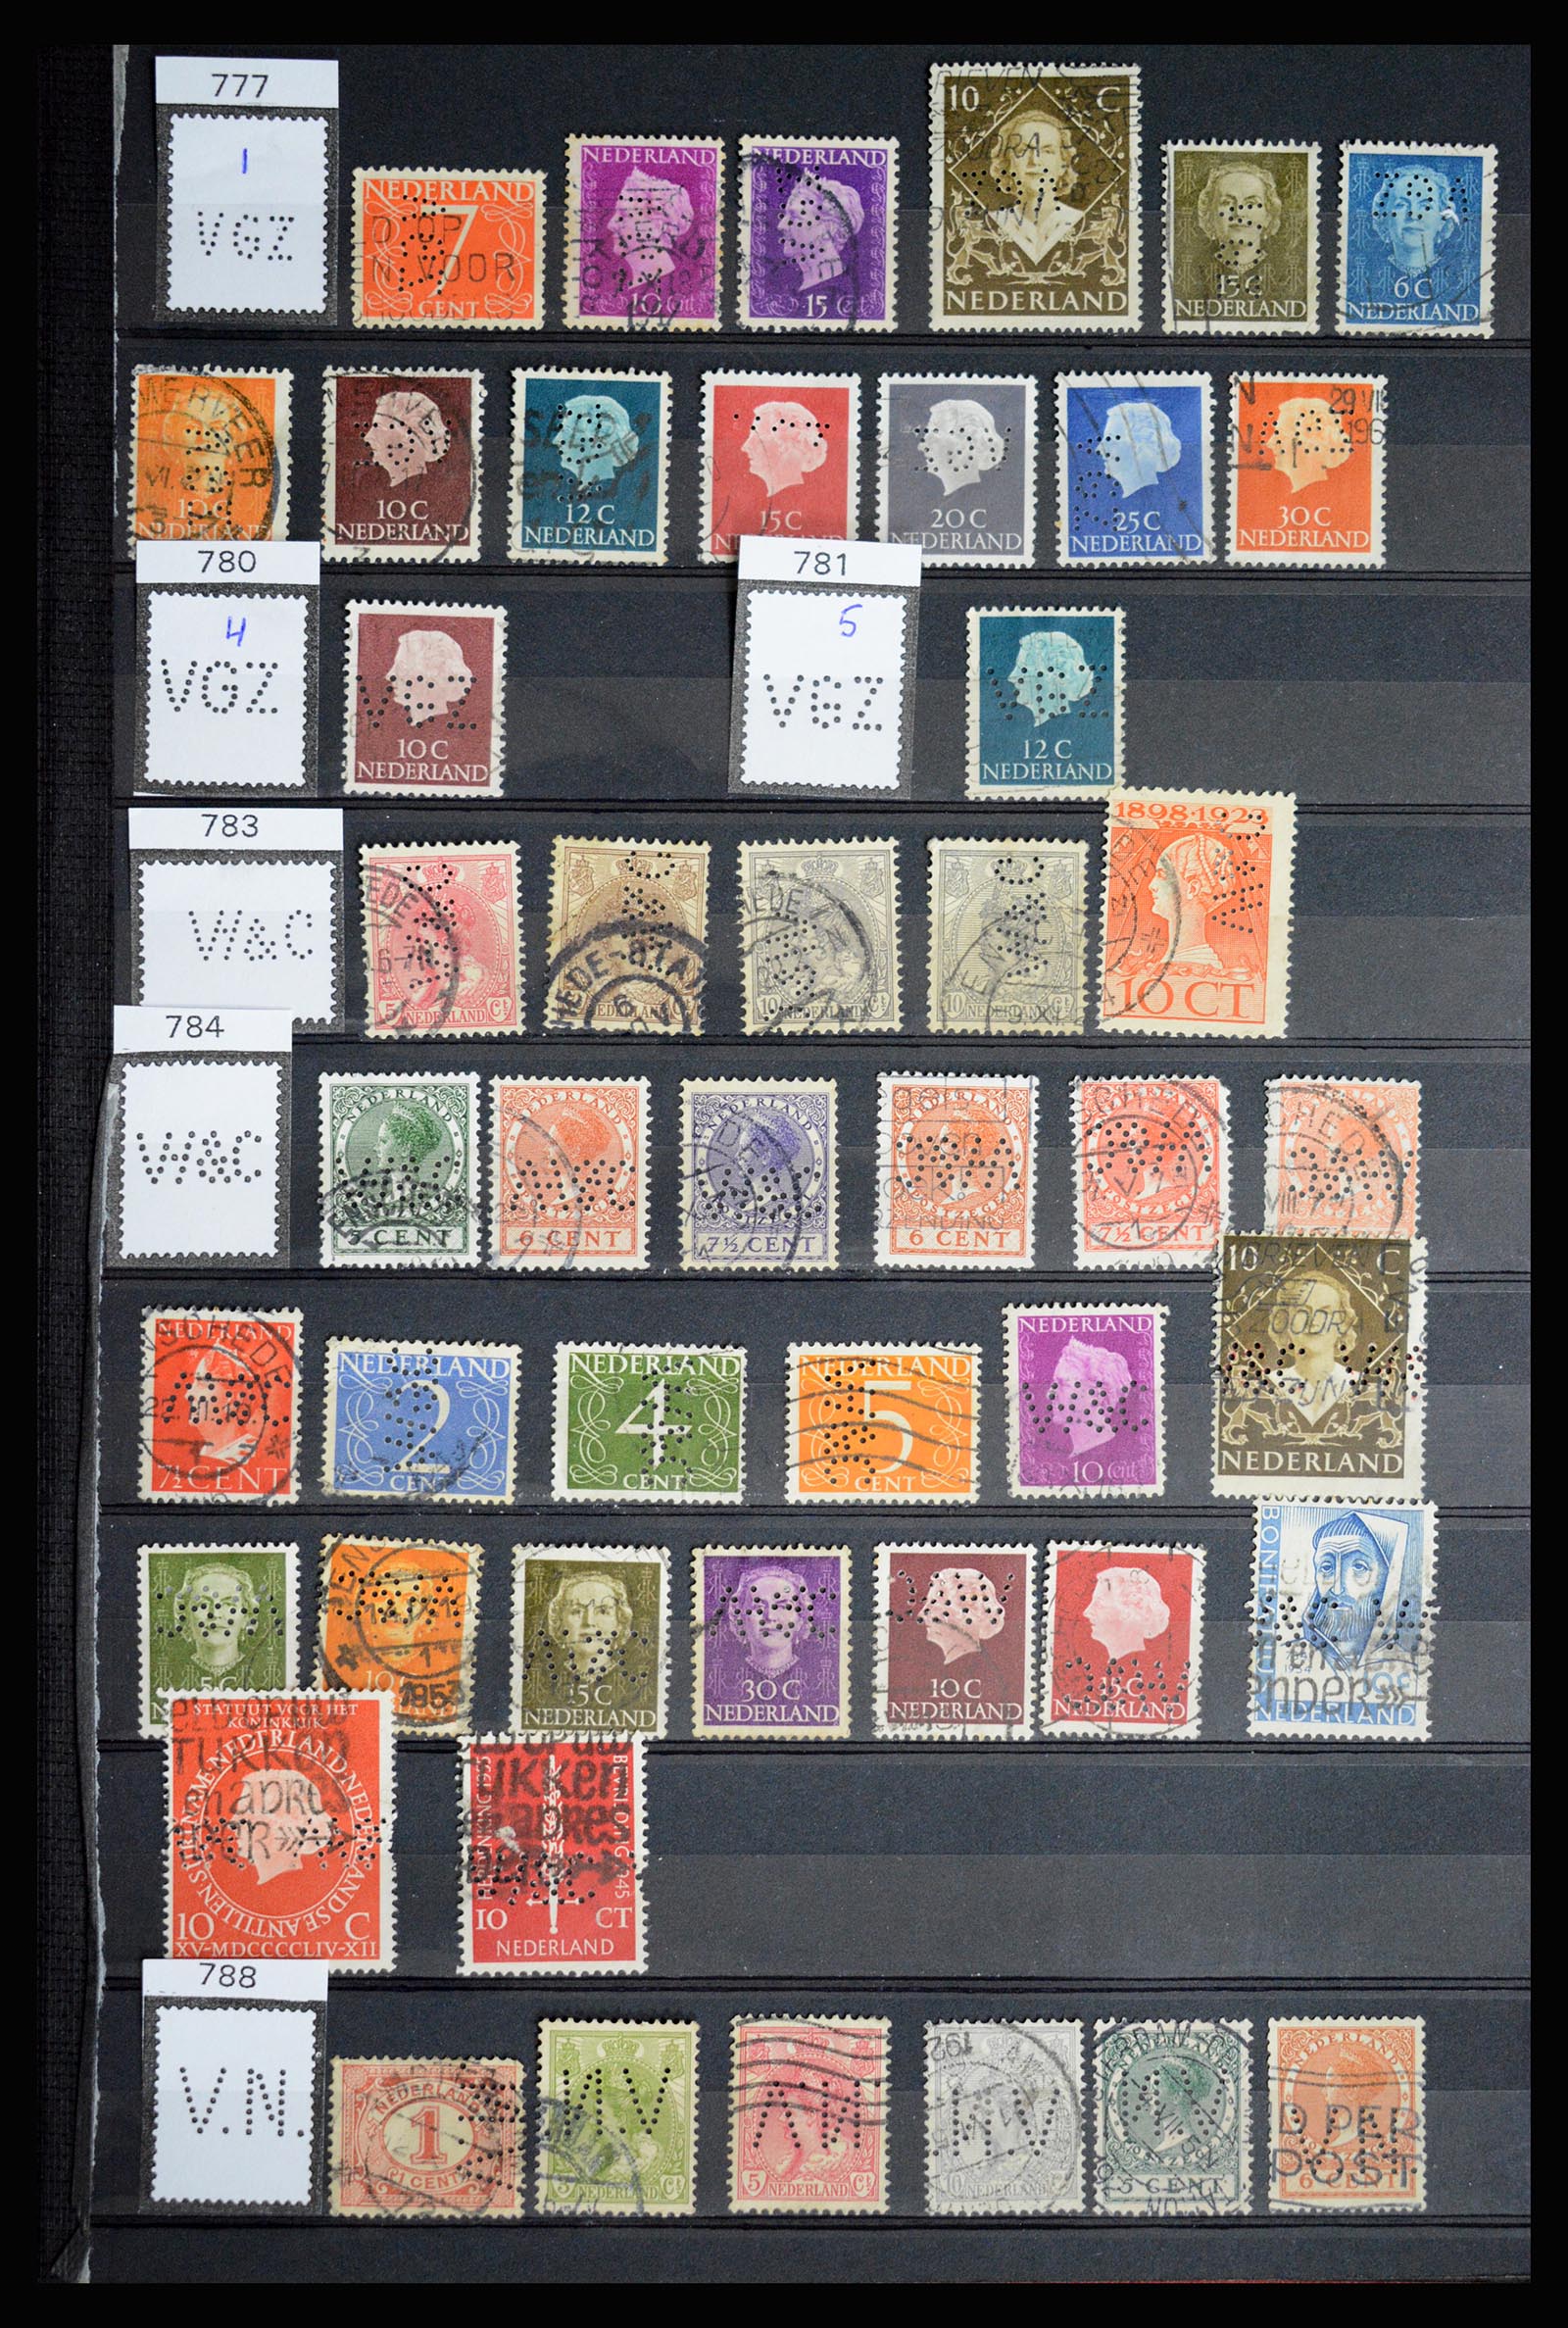 36849 075 - Stamp collection 36849 Netherlands perfins 1891-1960.